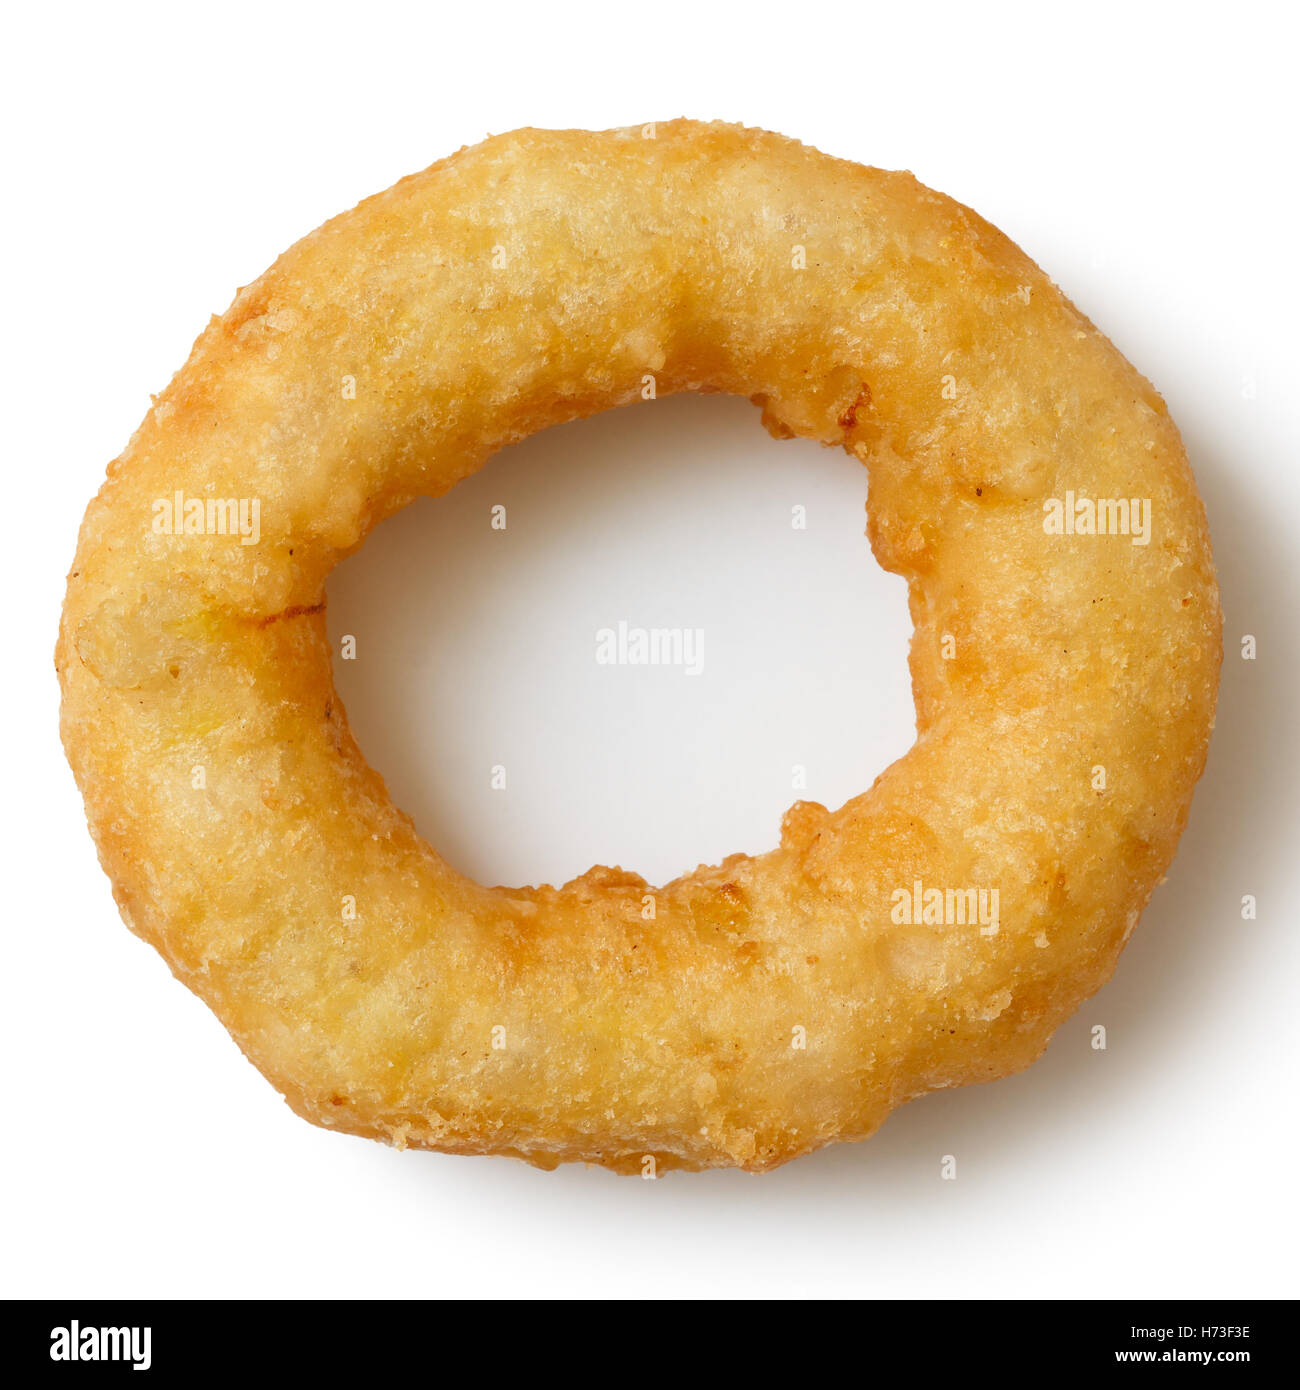 Single deep fried onion or calamari ring isolated from above. Stock Photo